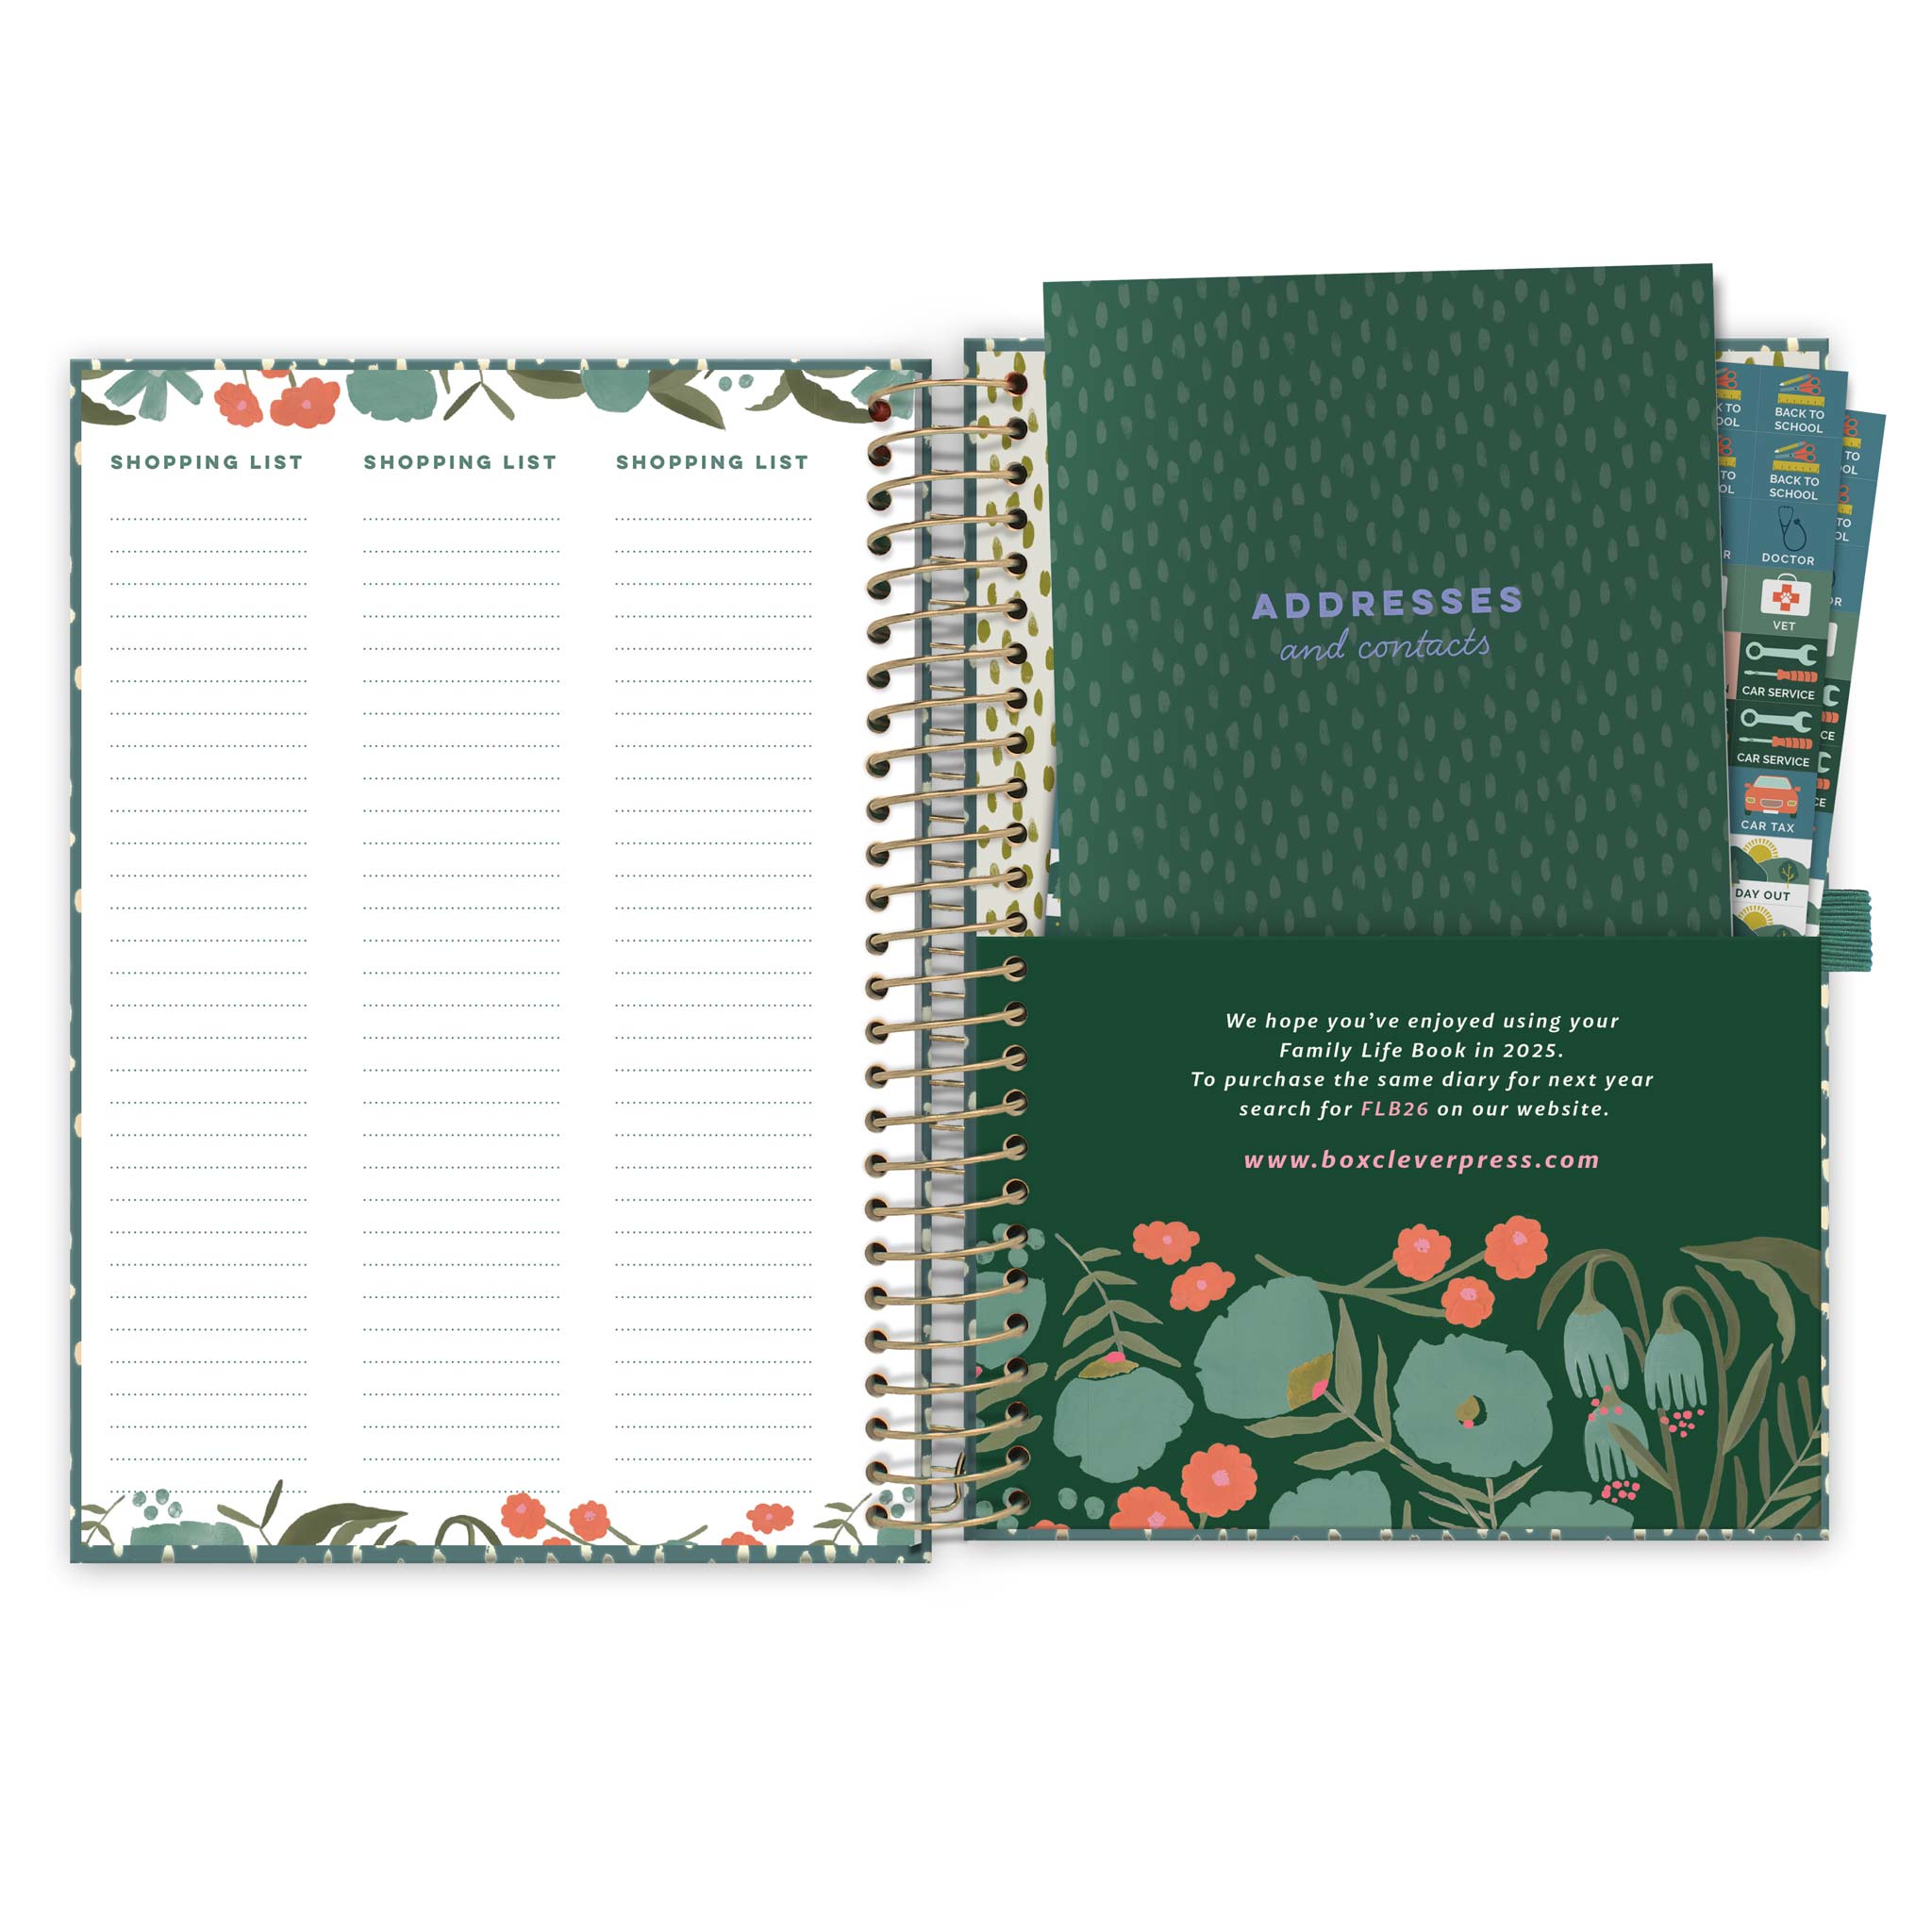 Back pages of a diary with perforated shopping lists and a green pocket with an address book and reminder stickers